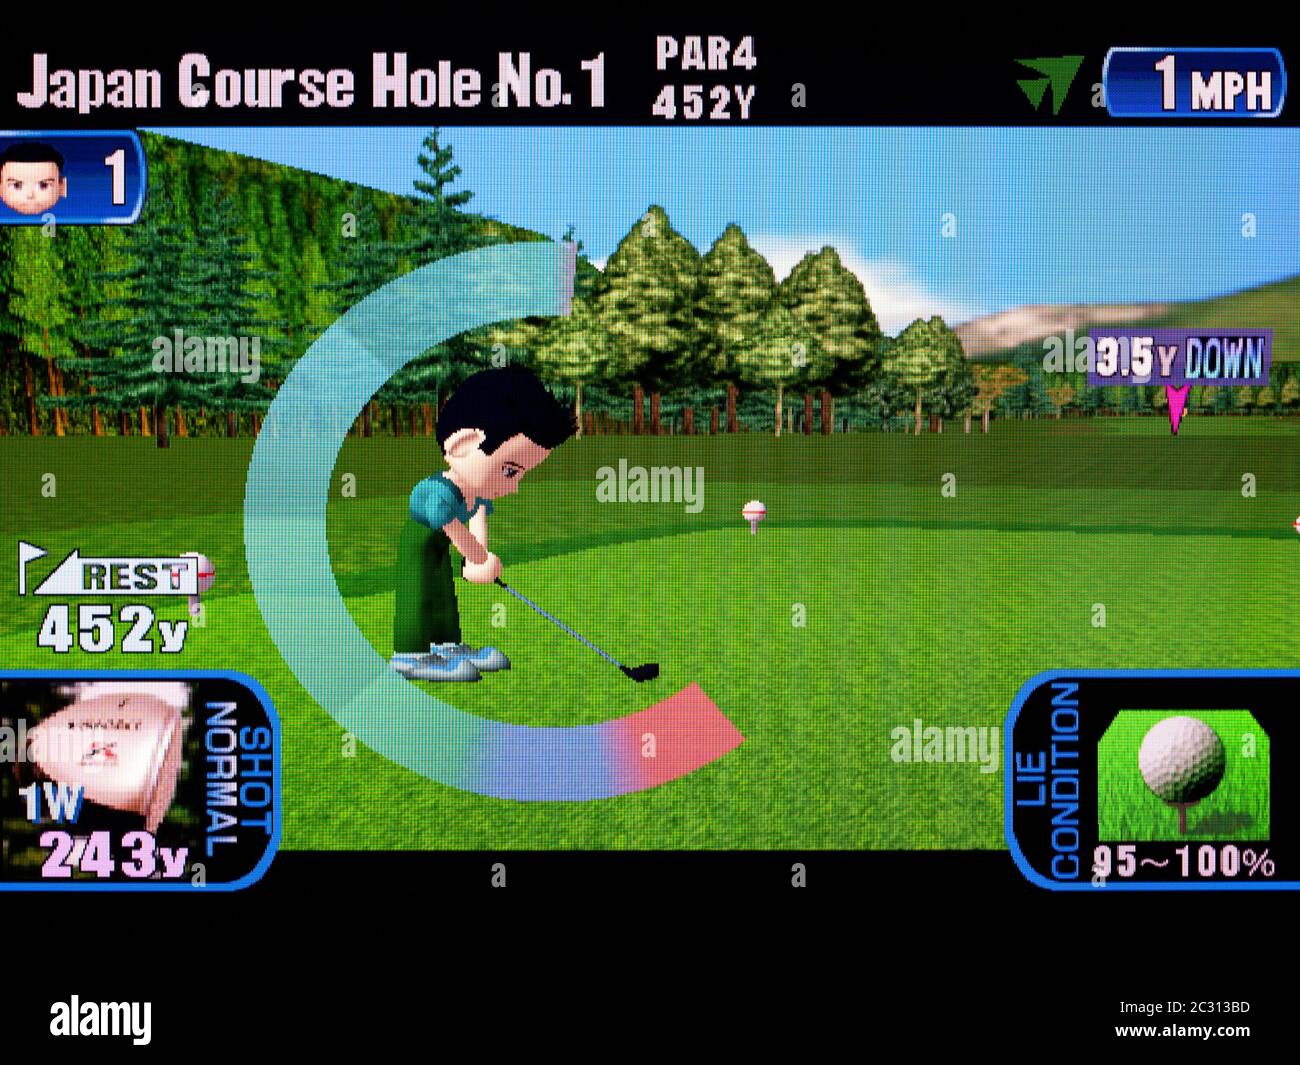 Tee Off - Sega Dreamcast Videogame - Editorial use only Stock Photo